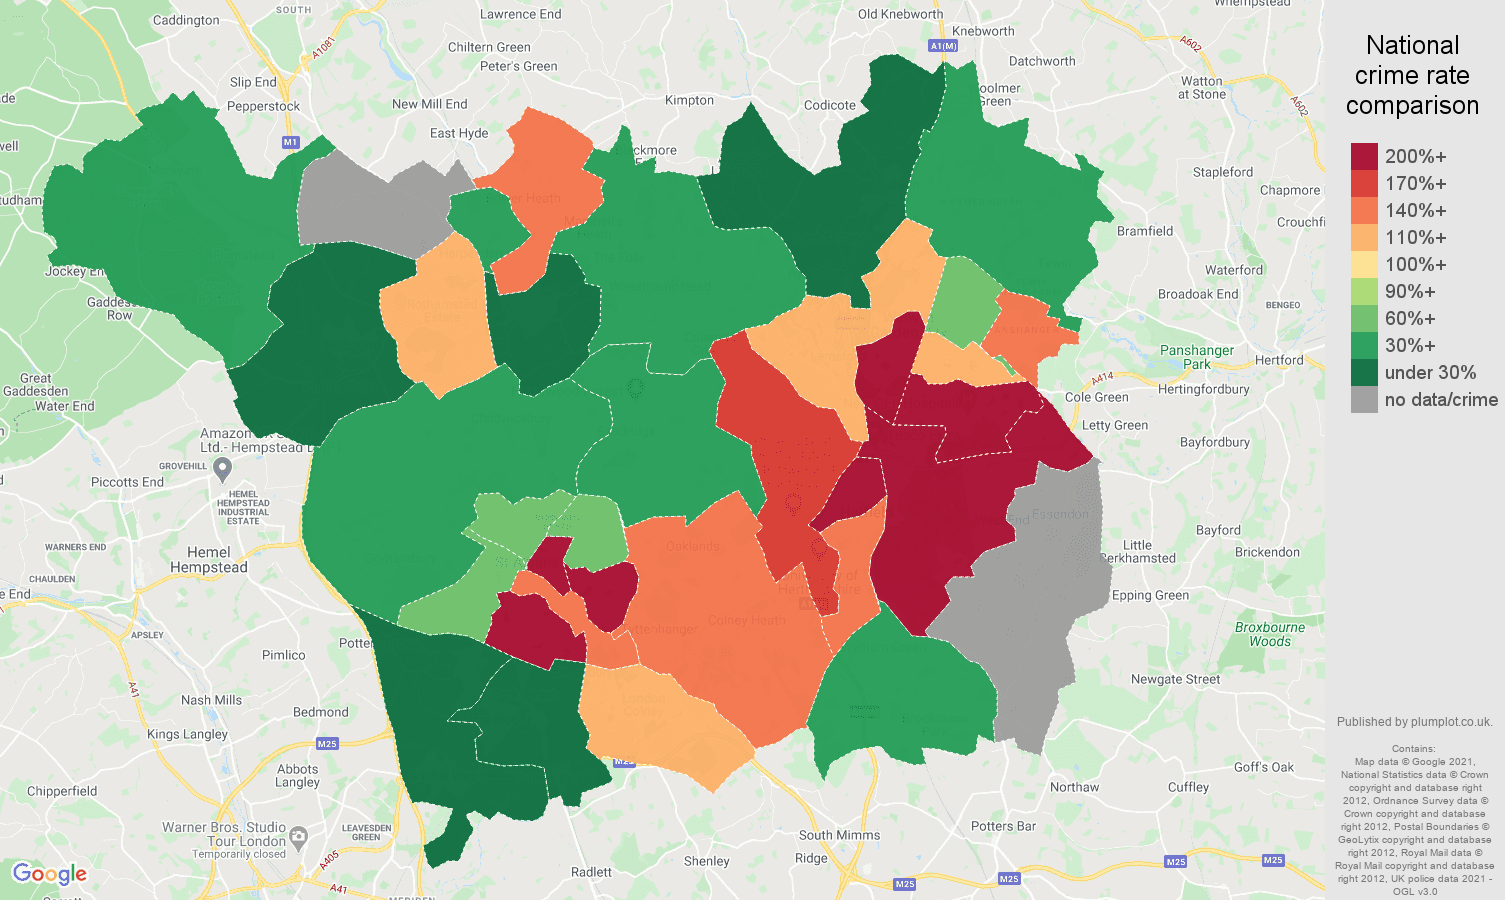 St Albans bicycle theft crime rate comparison map